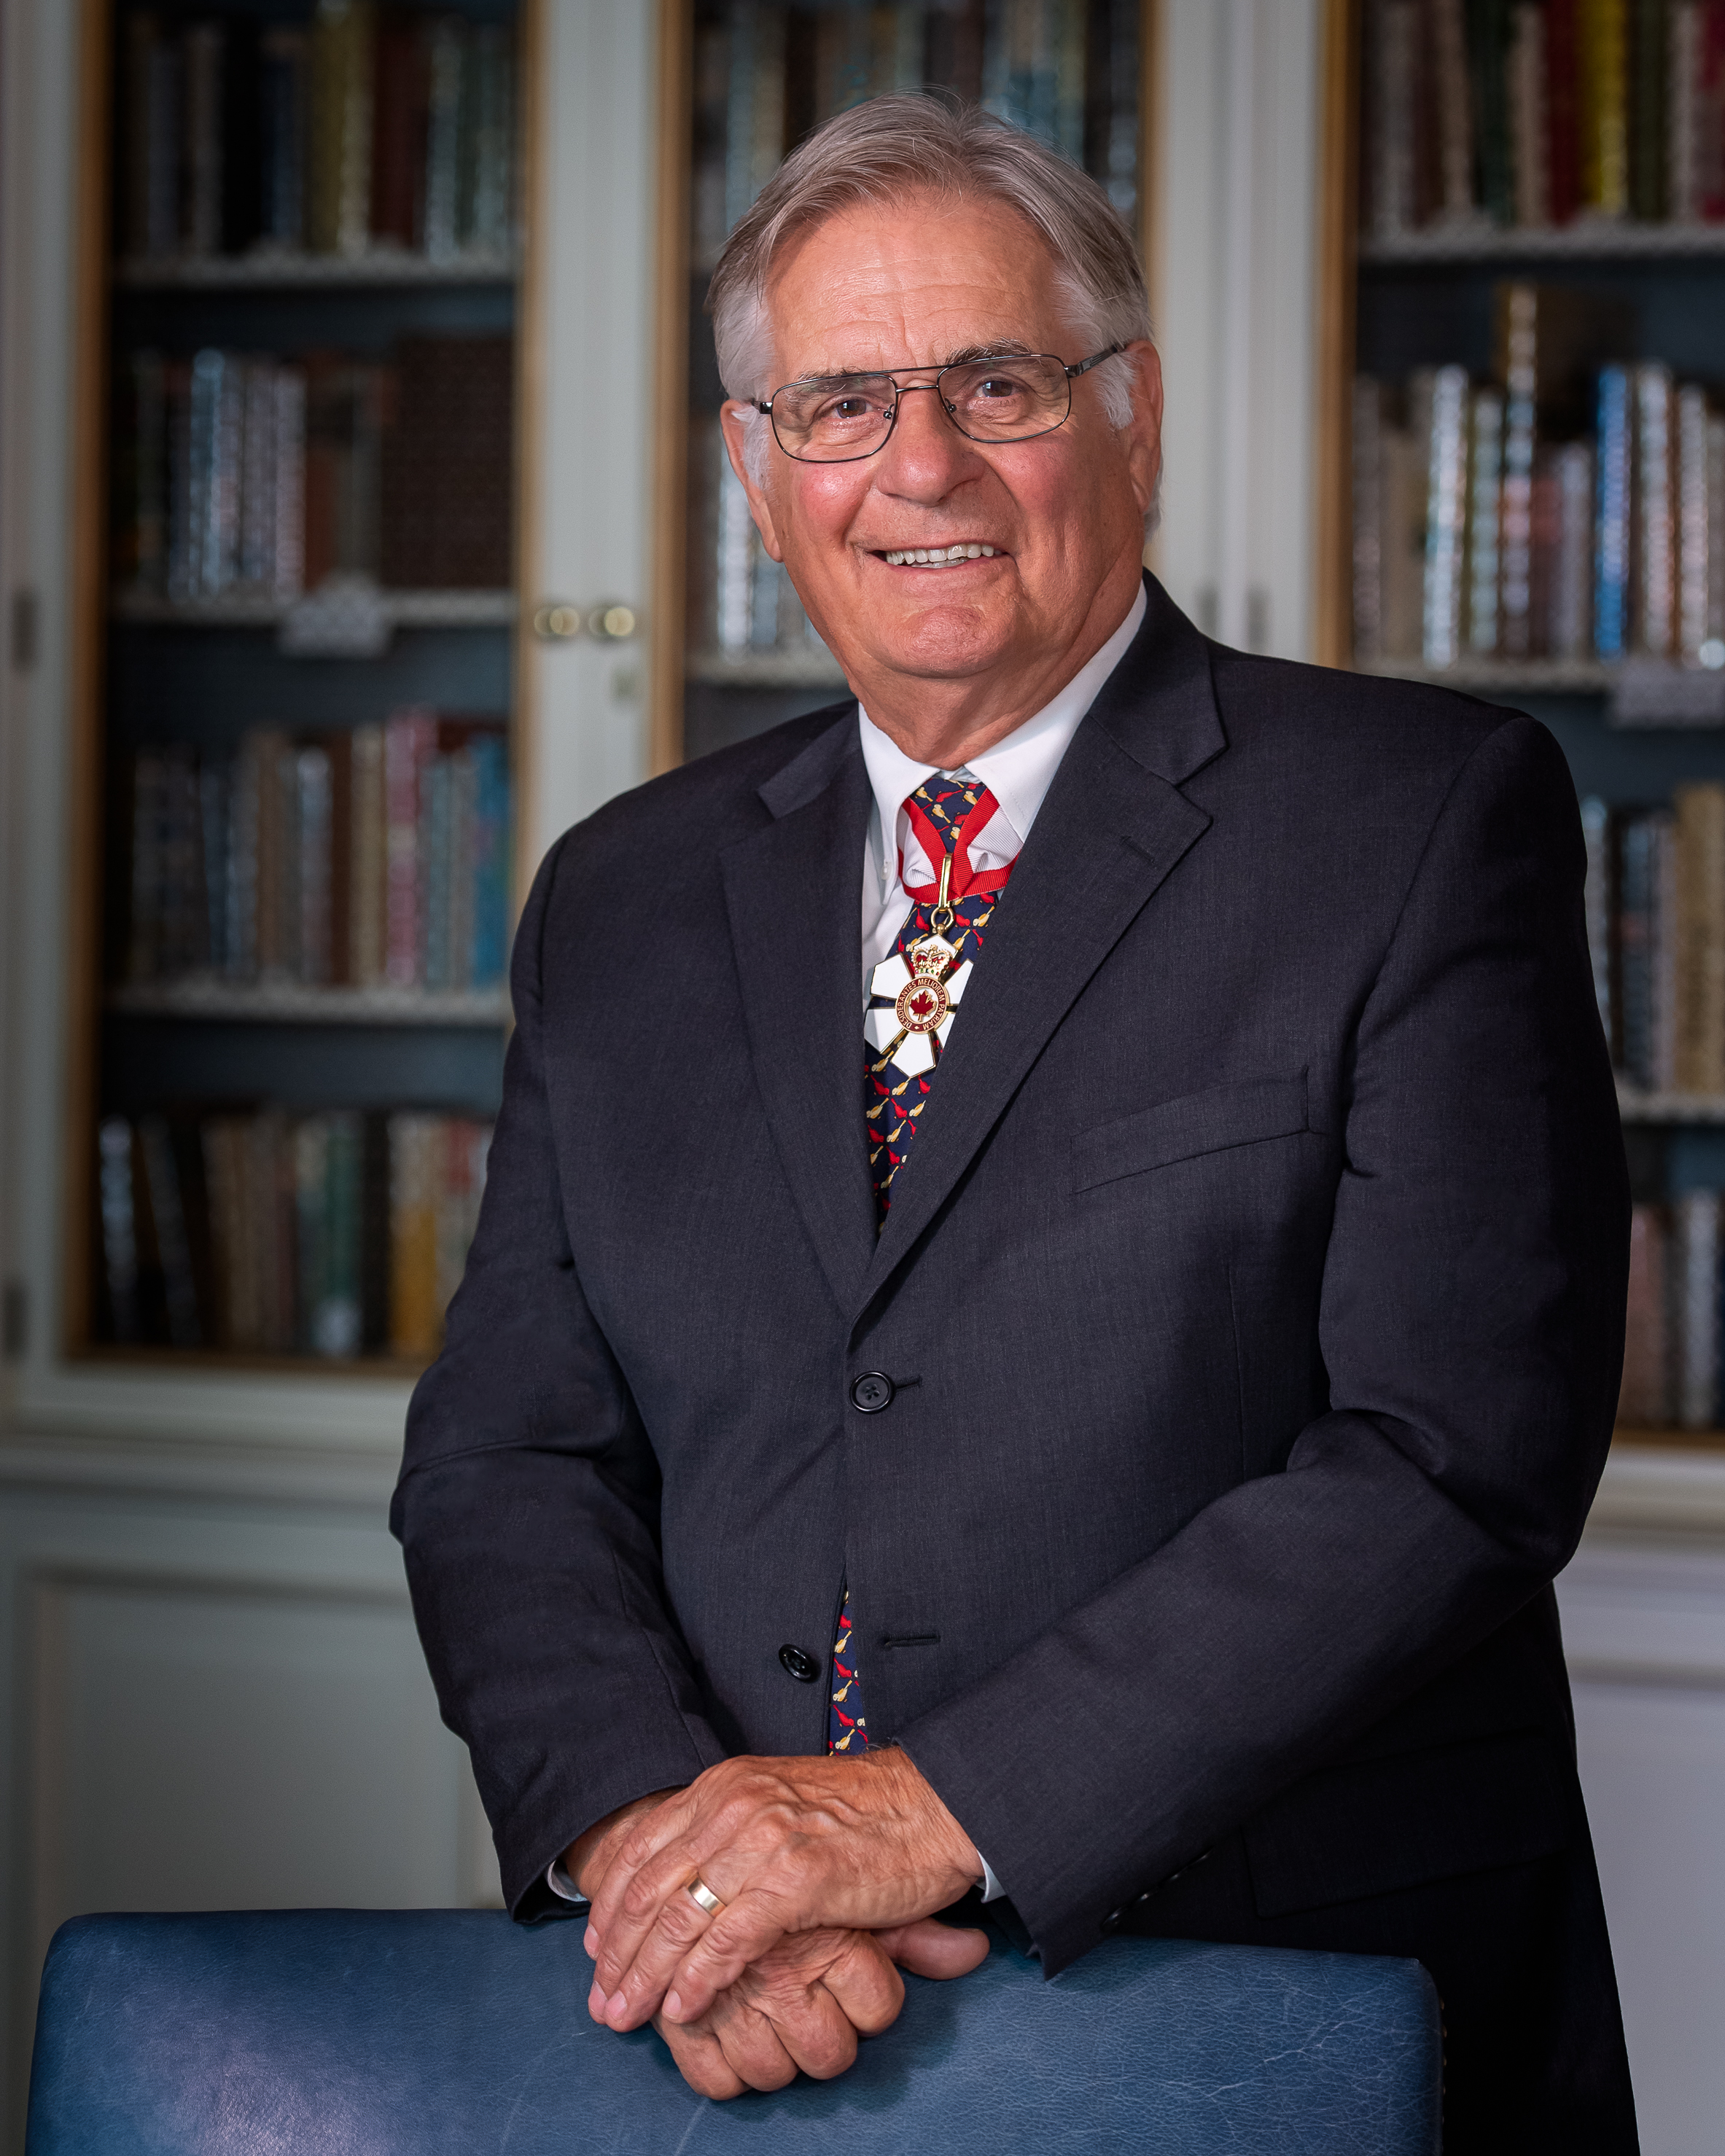 Official photo of His Excellency Whit Grant Fraser. Bookshelves are visible in the background.